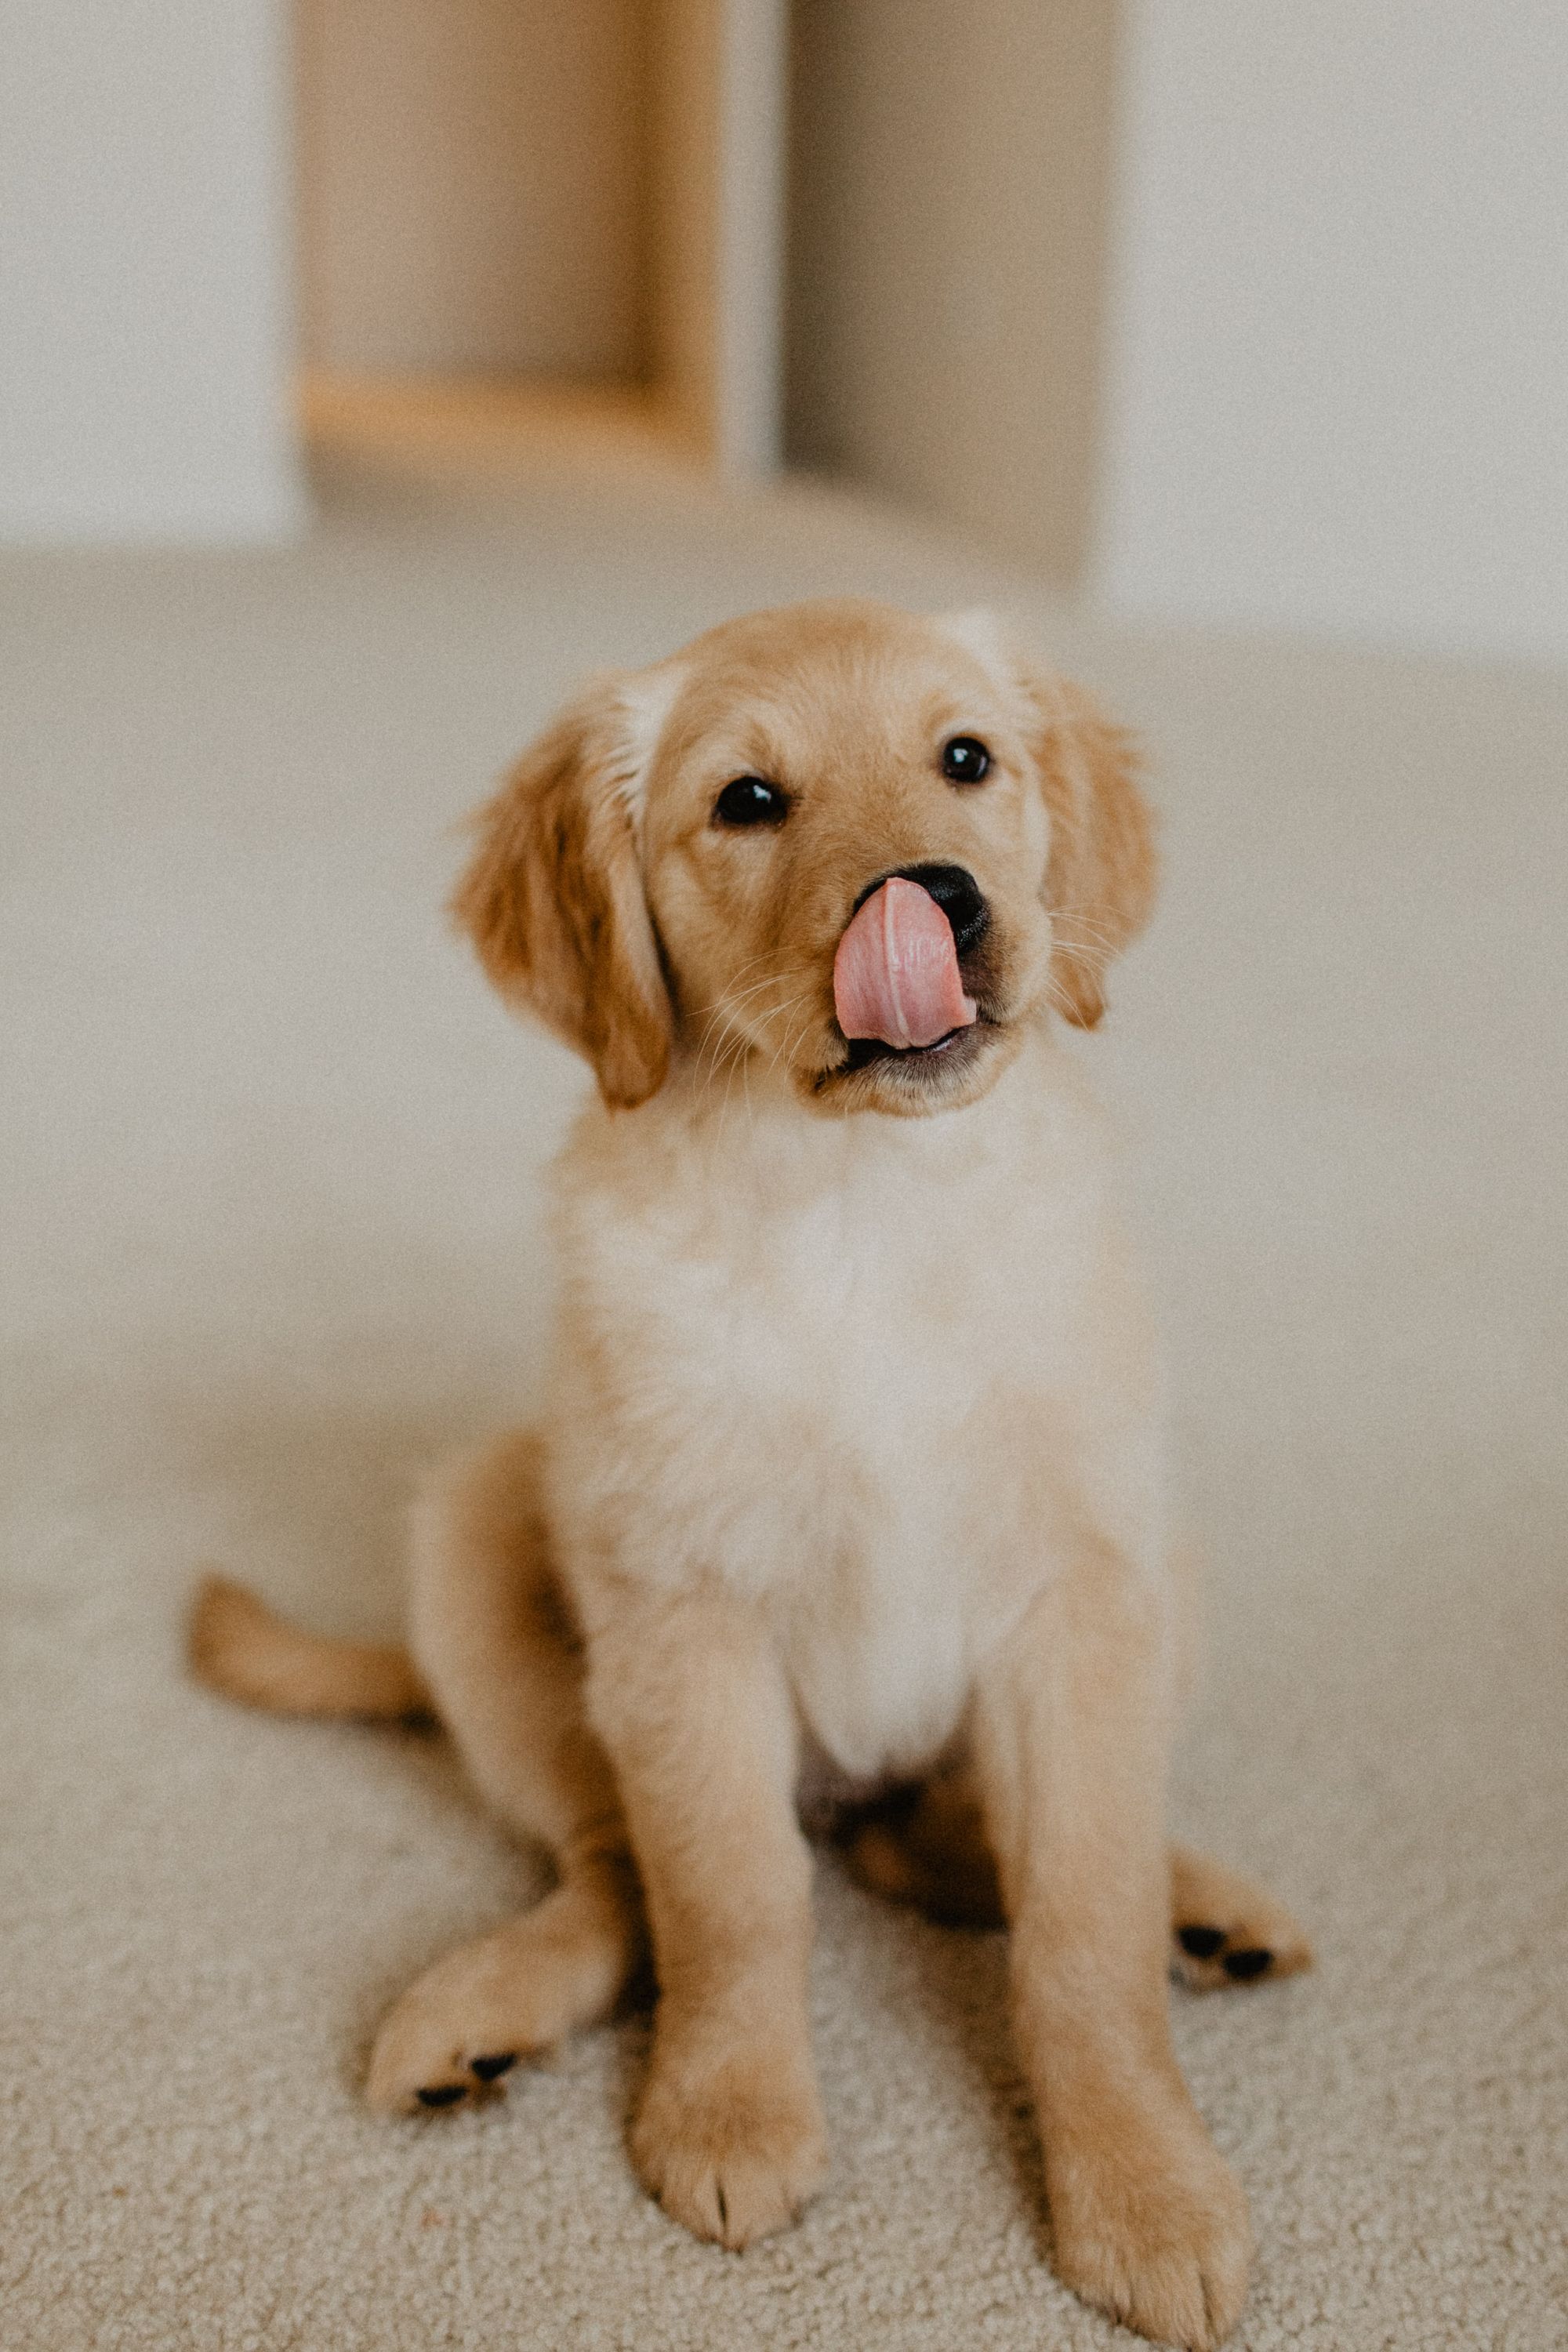 Image of a golden retriever puppy on a white floor